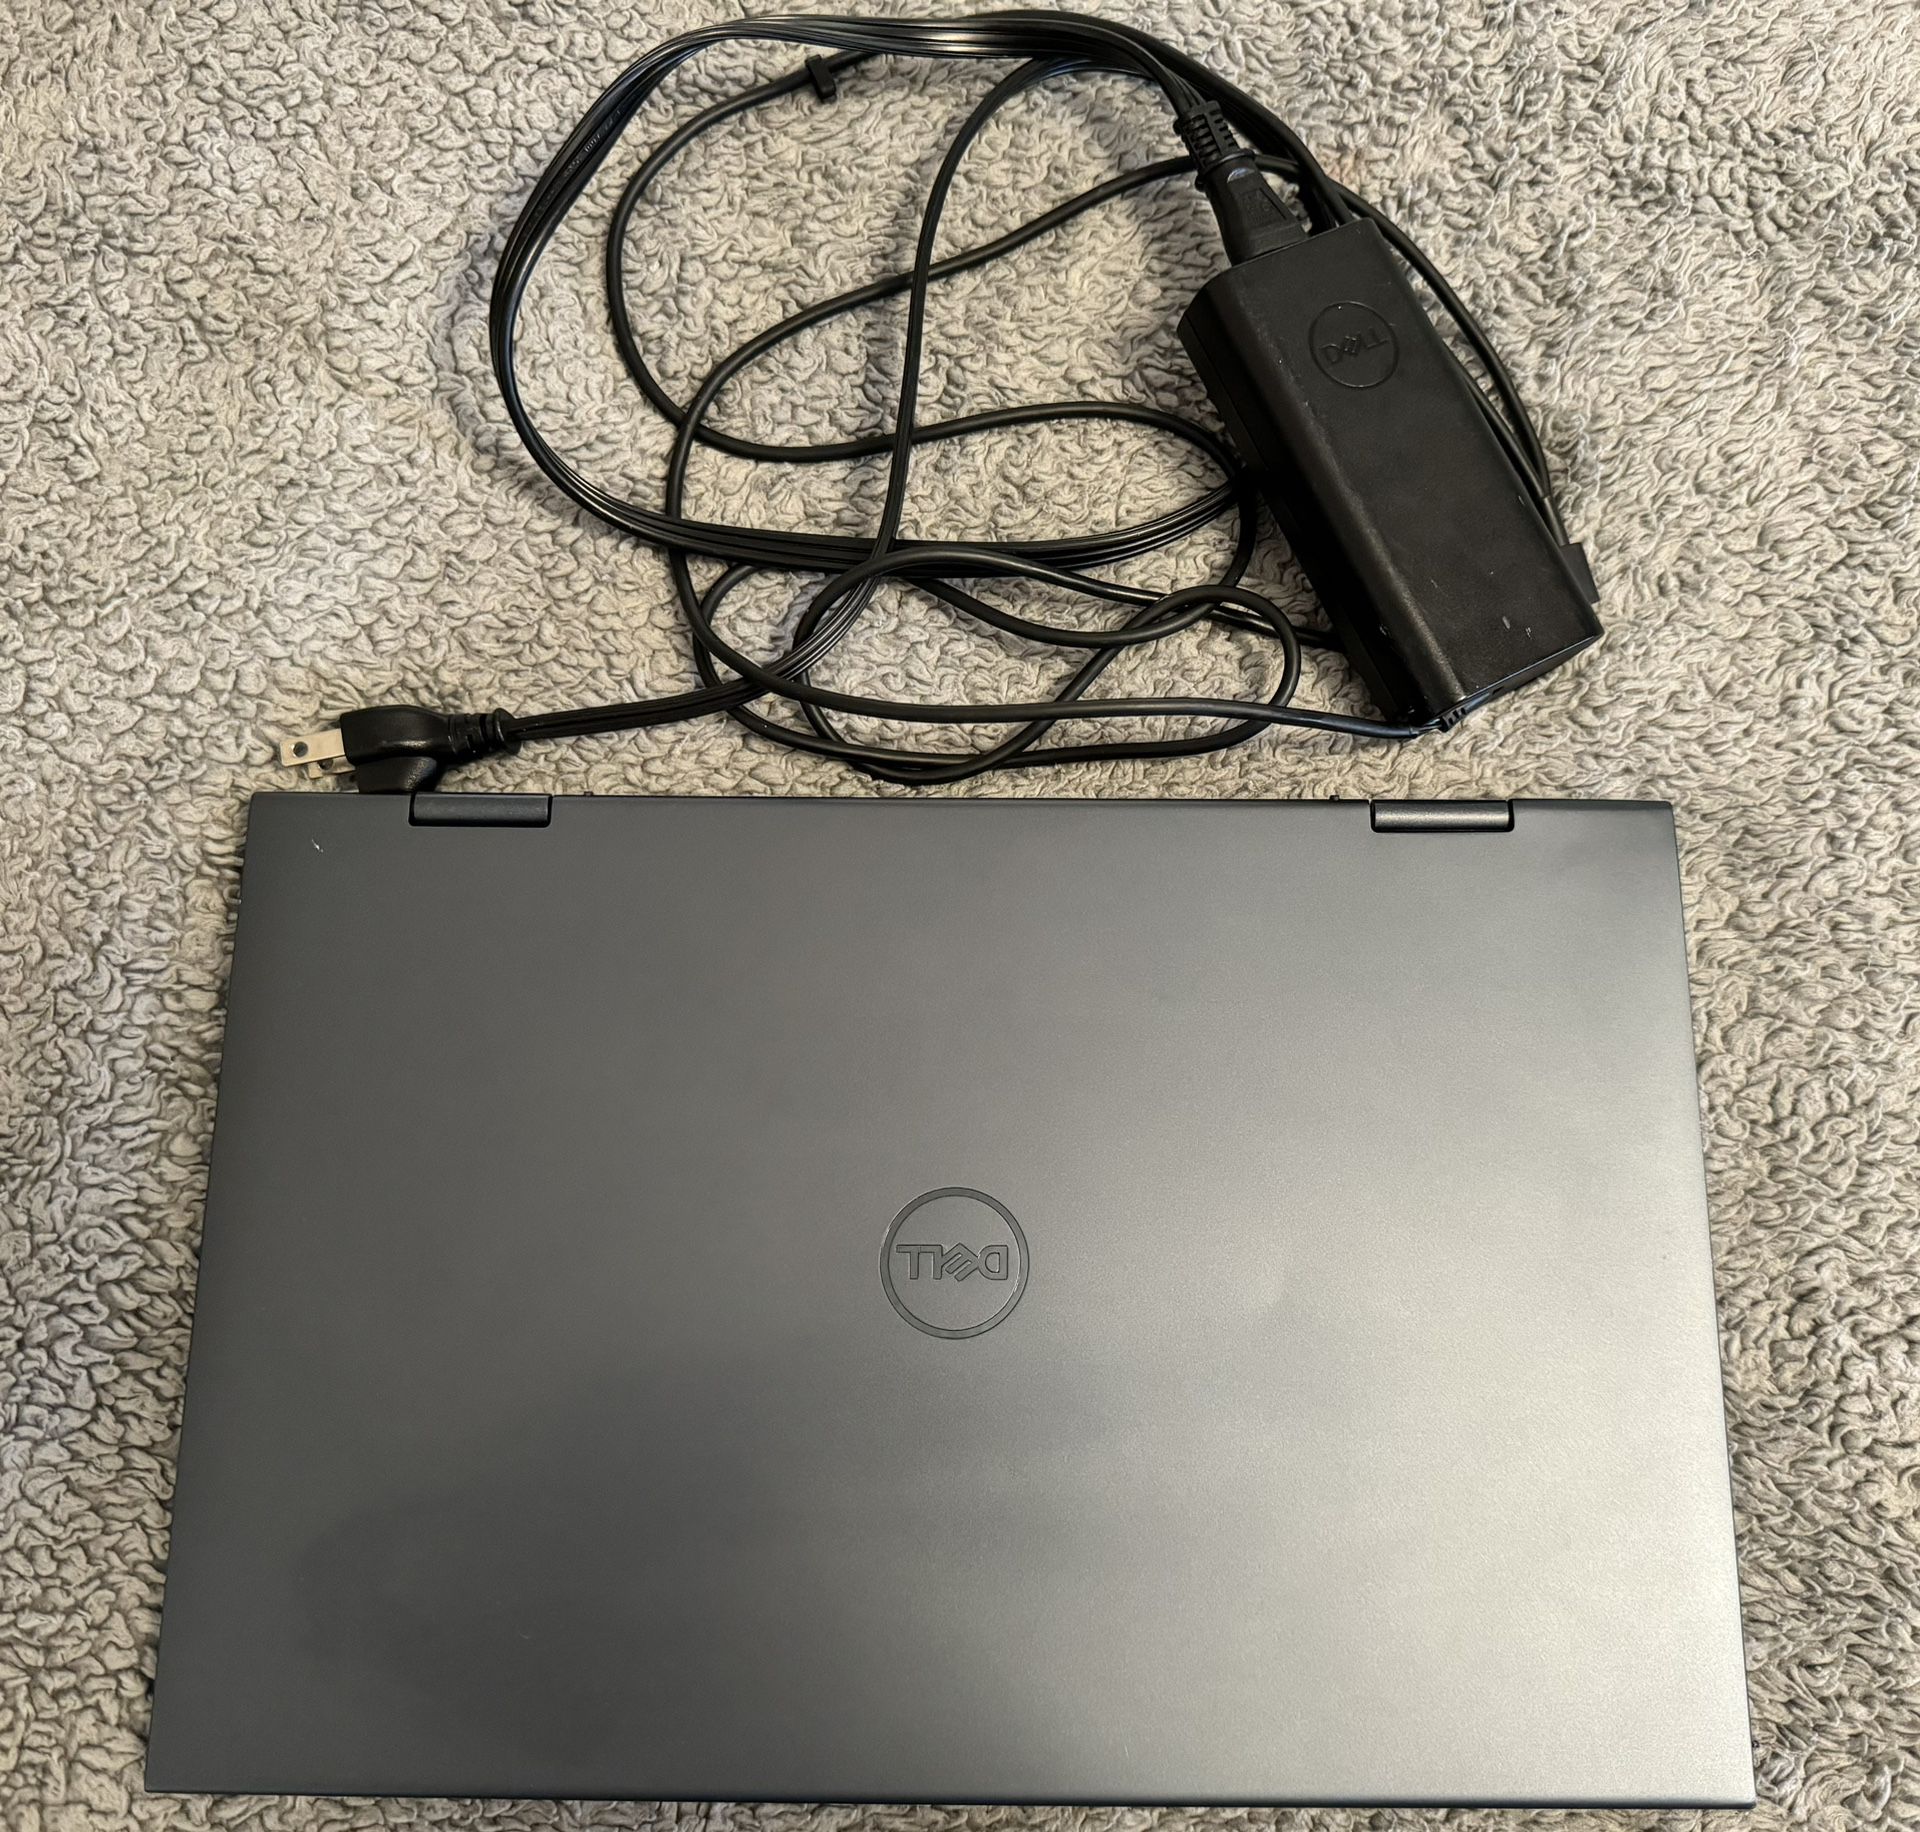 Dell 2 in 1 laptop and tablet